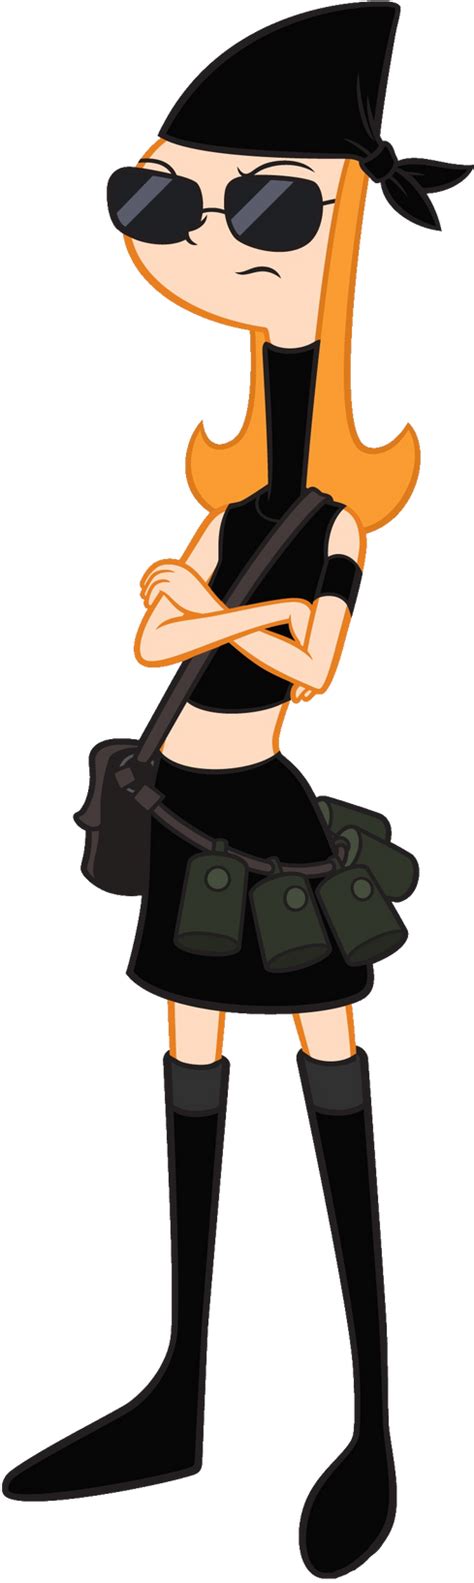 Candace Flynn By Phineasferb2d On Deviantart